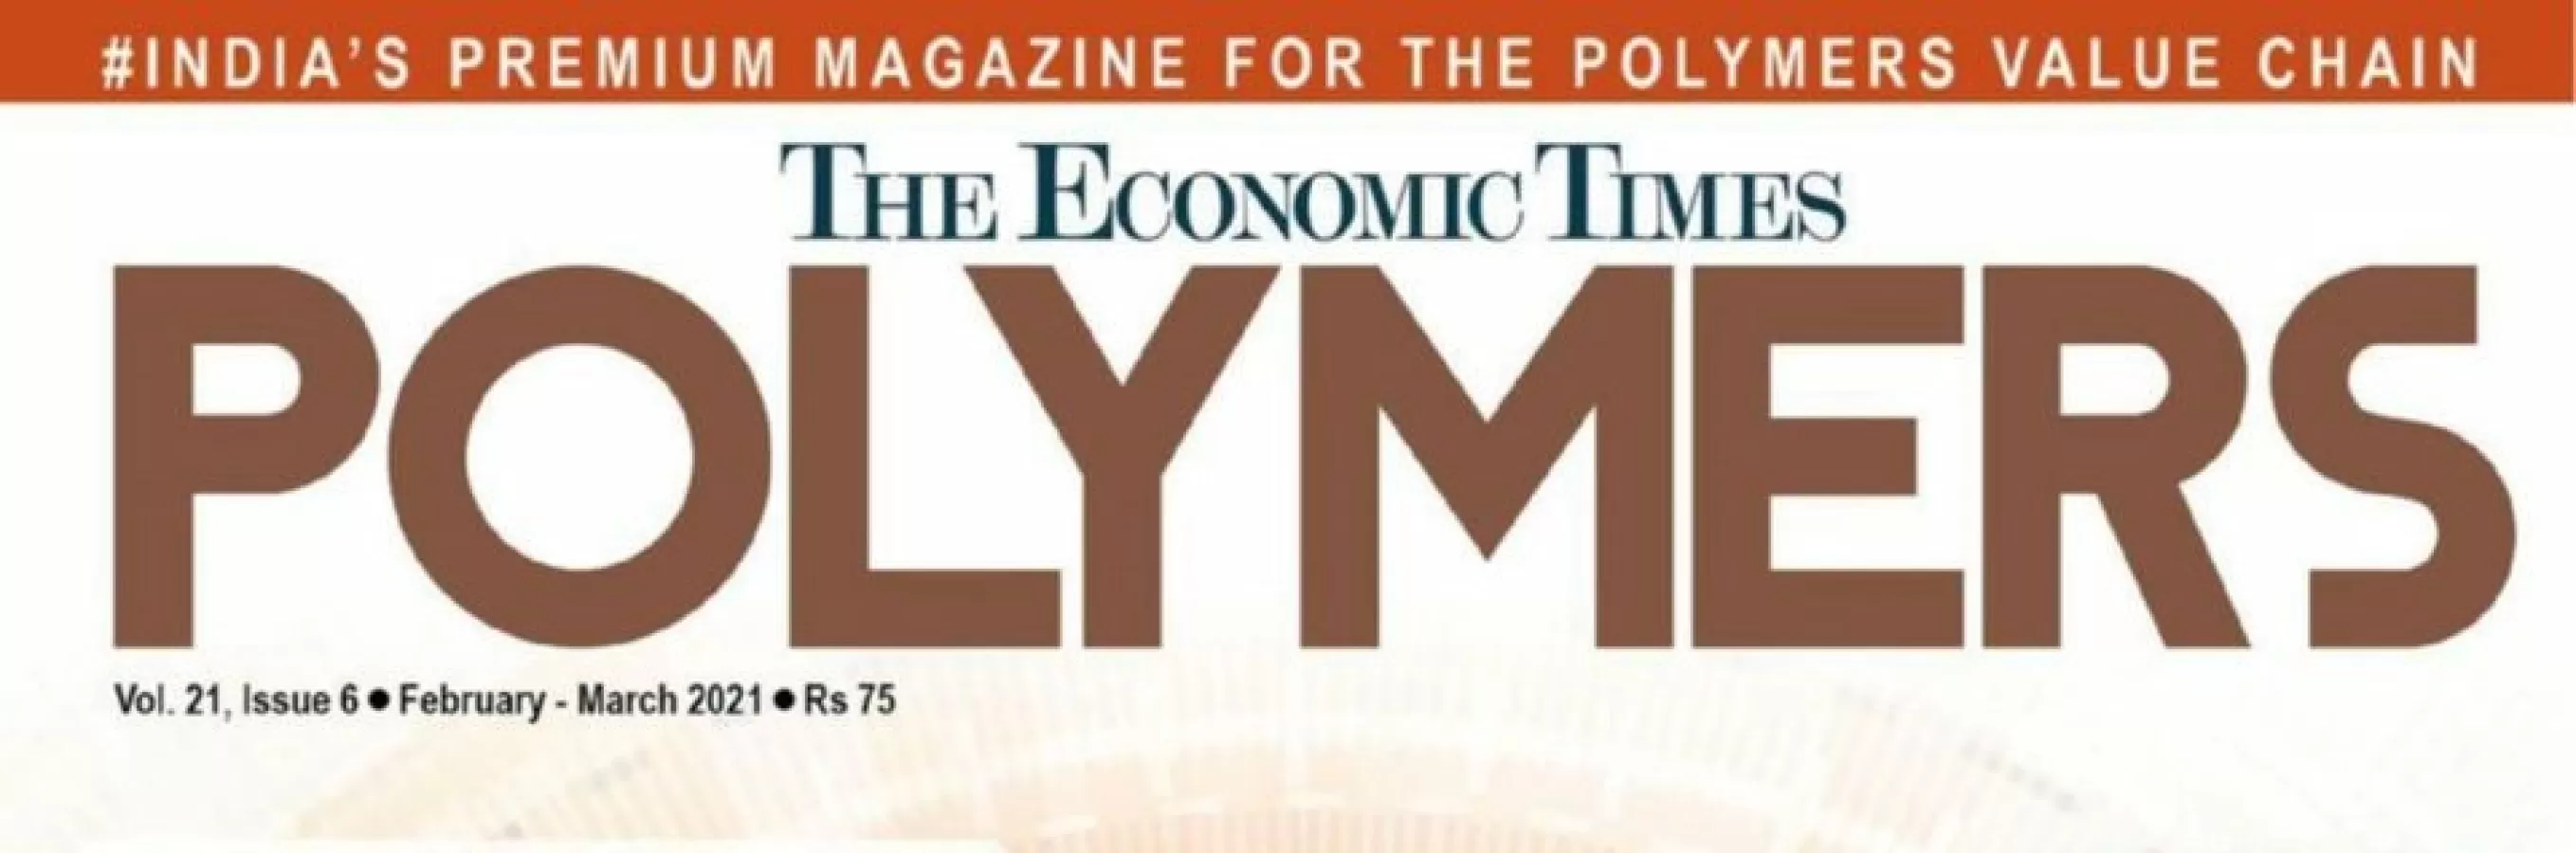 Magazine Media The Economic Times Polymers Advertising in India